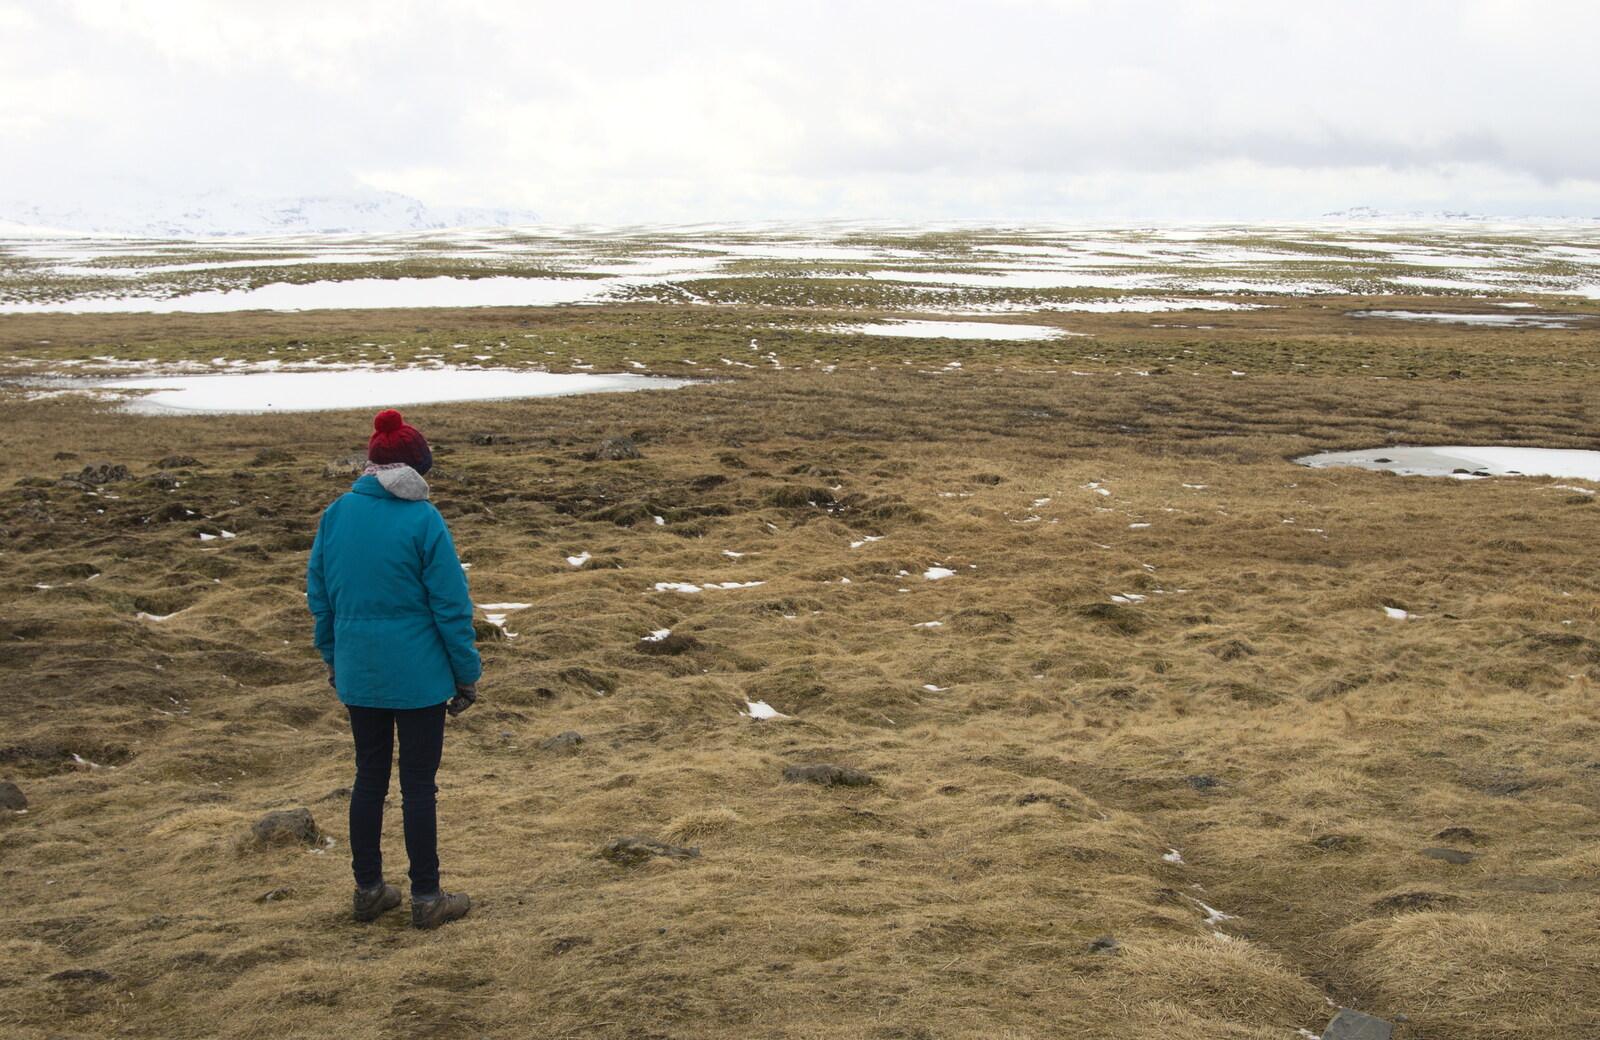 Isobel looks out on the icy wastes from The Golden Circle of Ísland, Iceland - 22nd April 2017